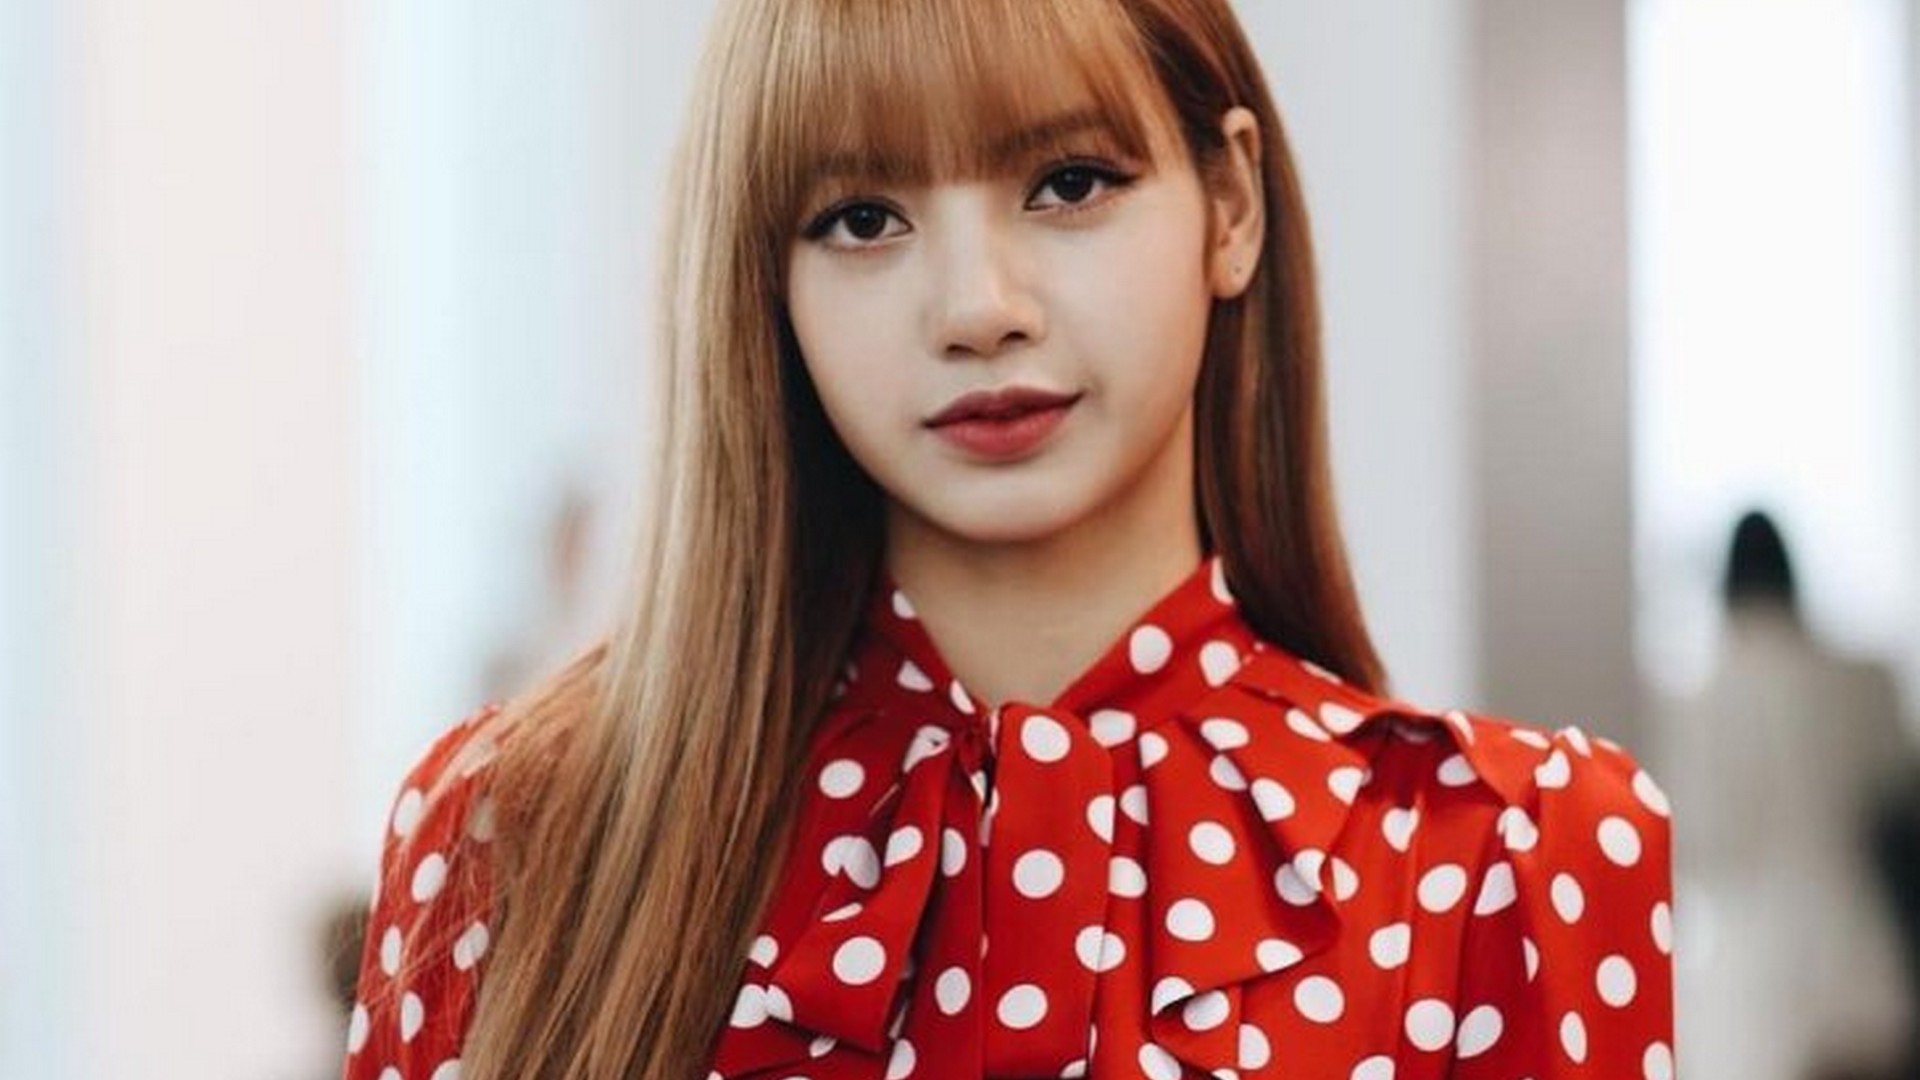 Blackpink Lisa Wallpaper HD with high-resolution 1920x1080 pixel. You can use this wallpaper for your Desktop Computer Backgrounds, Mac Wallpapers, Android Lock screen or iPhone Screensavers and another smartphone device